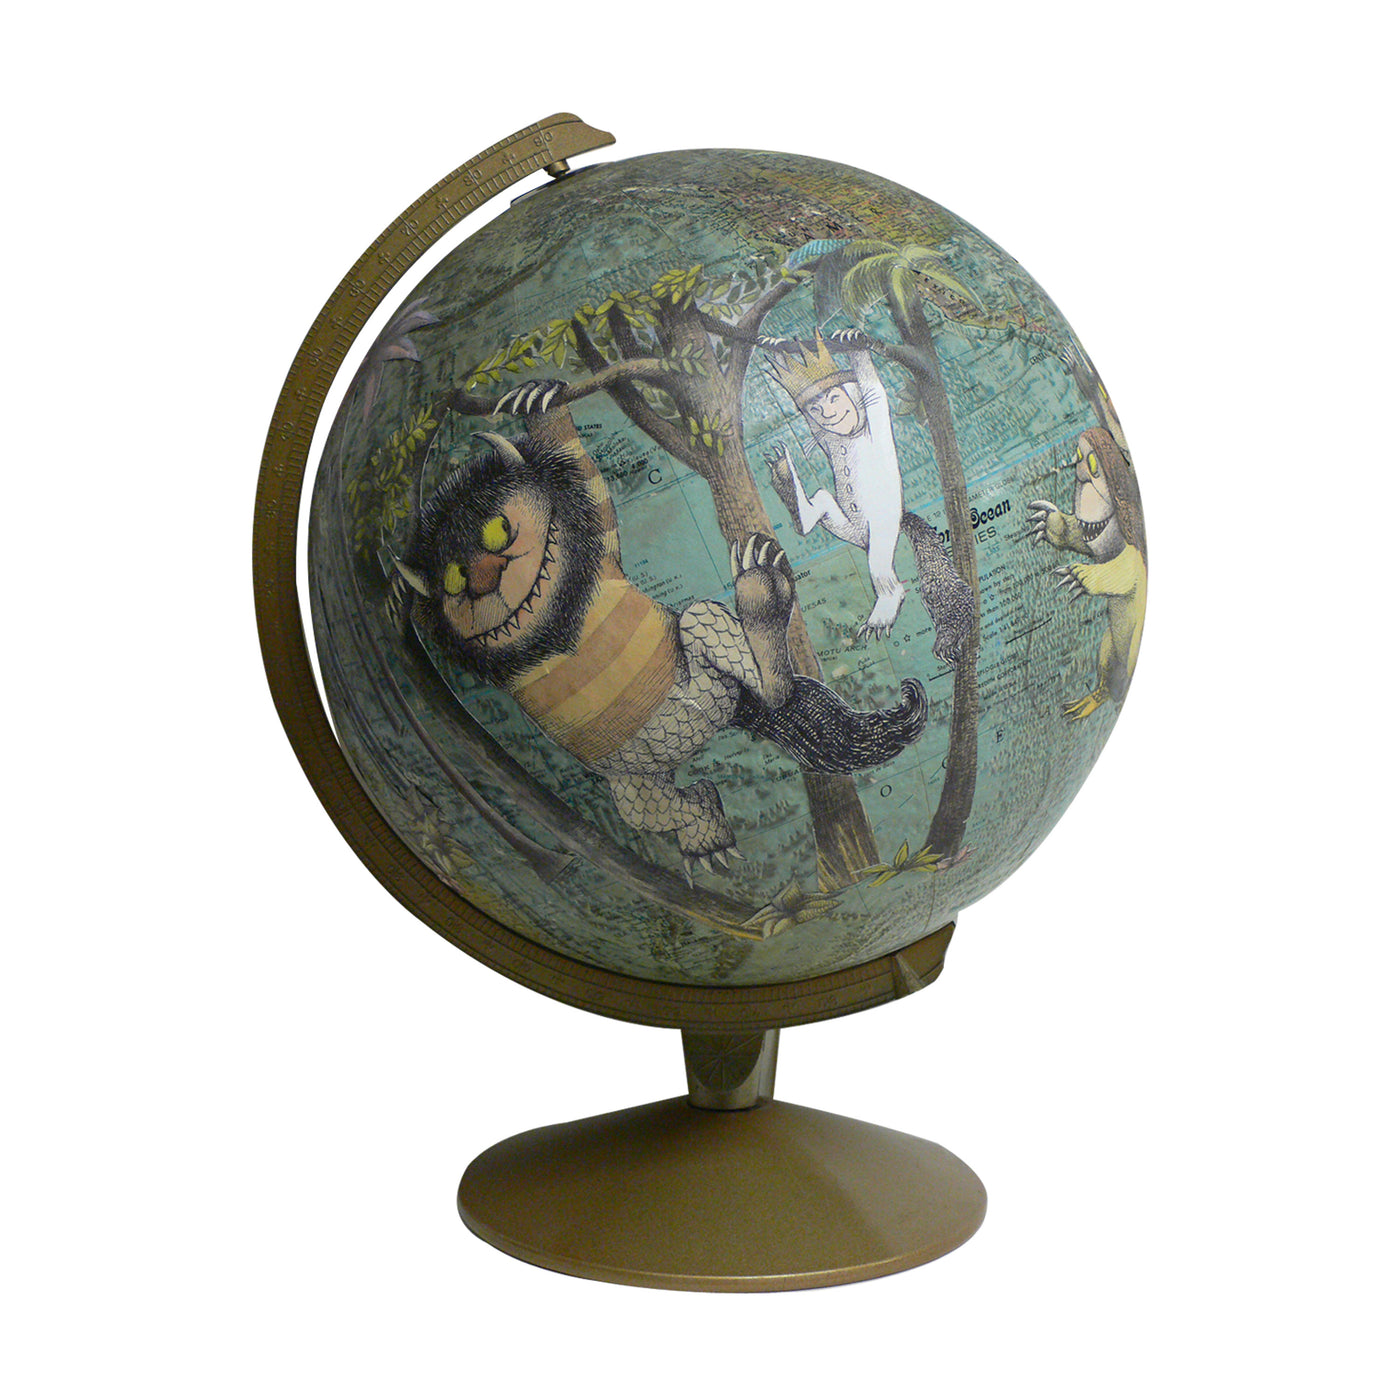 Where the Wild Things Are Vintage Globe Art